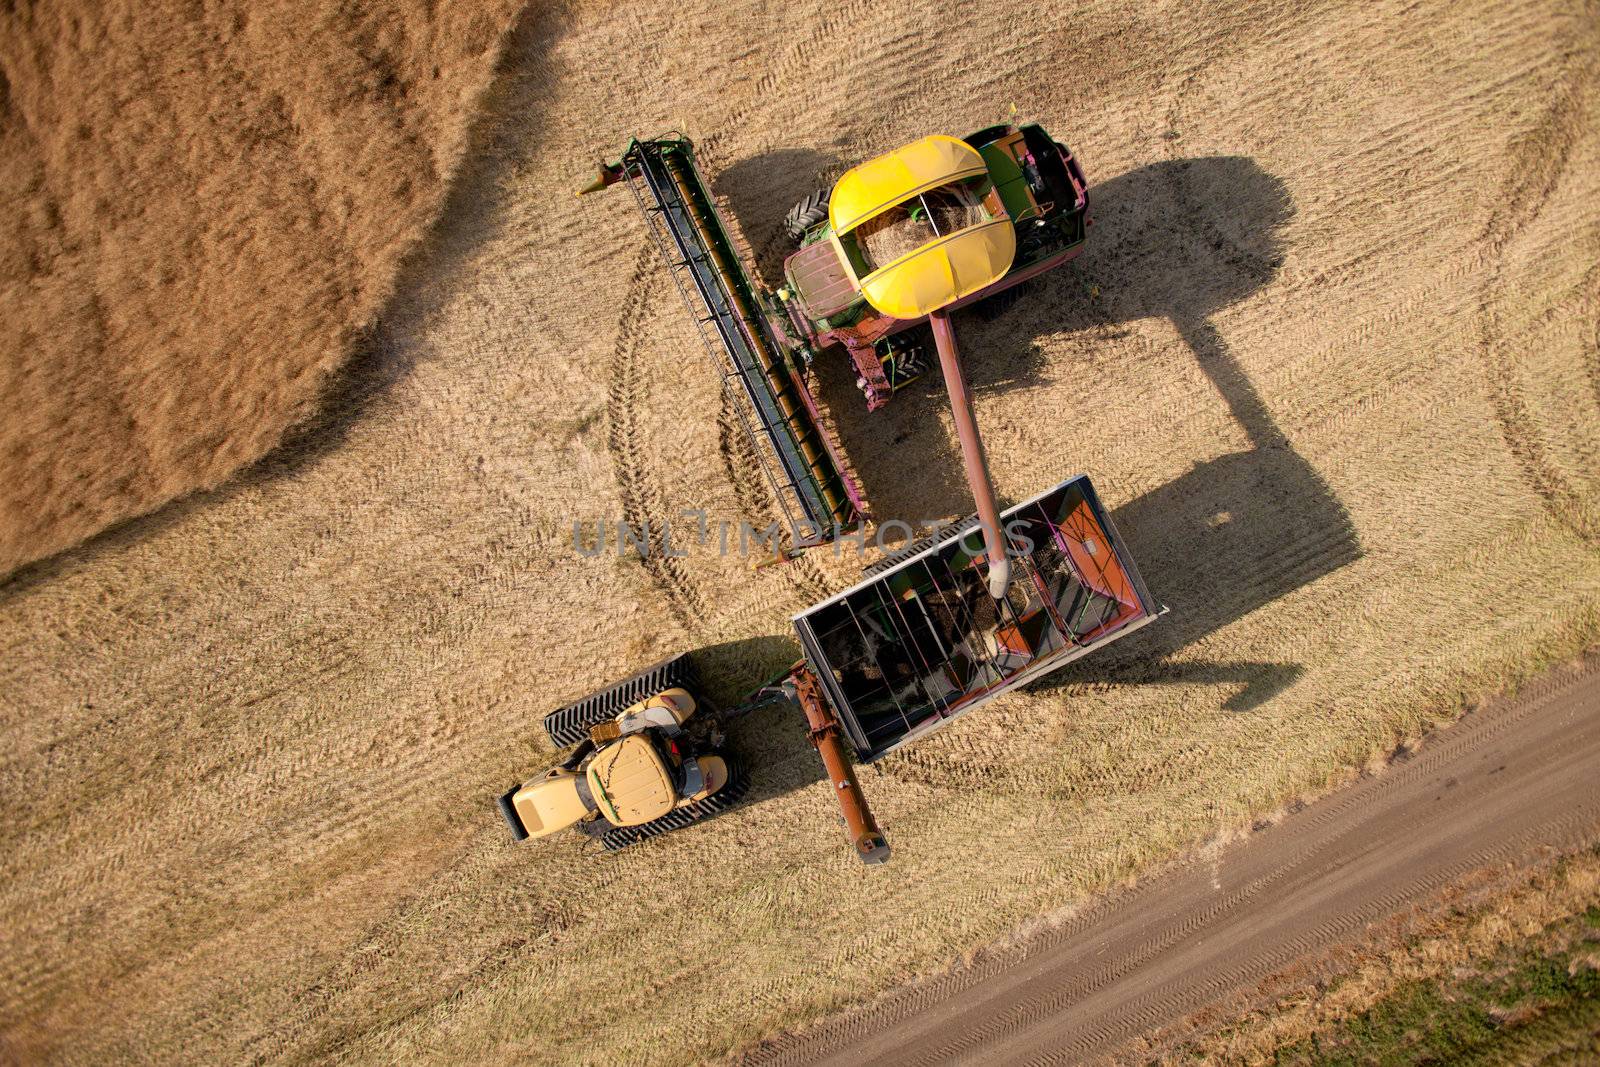 Top down view of a harvester unloading crop into a grain cart